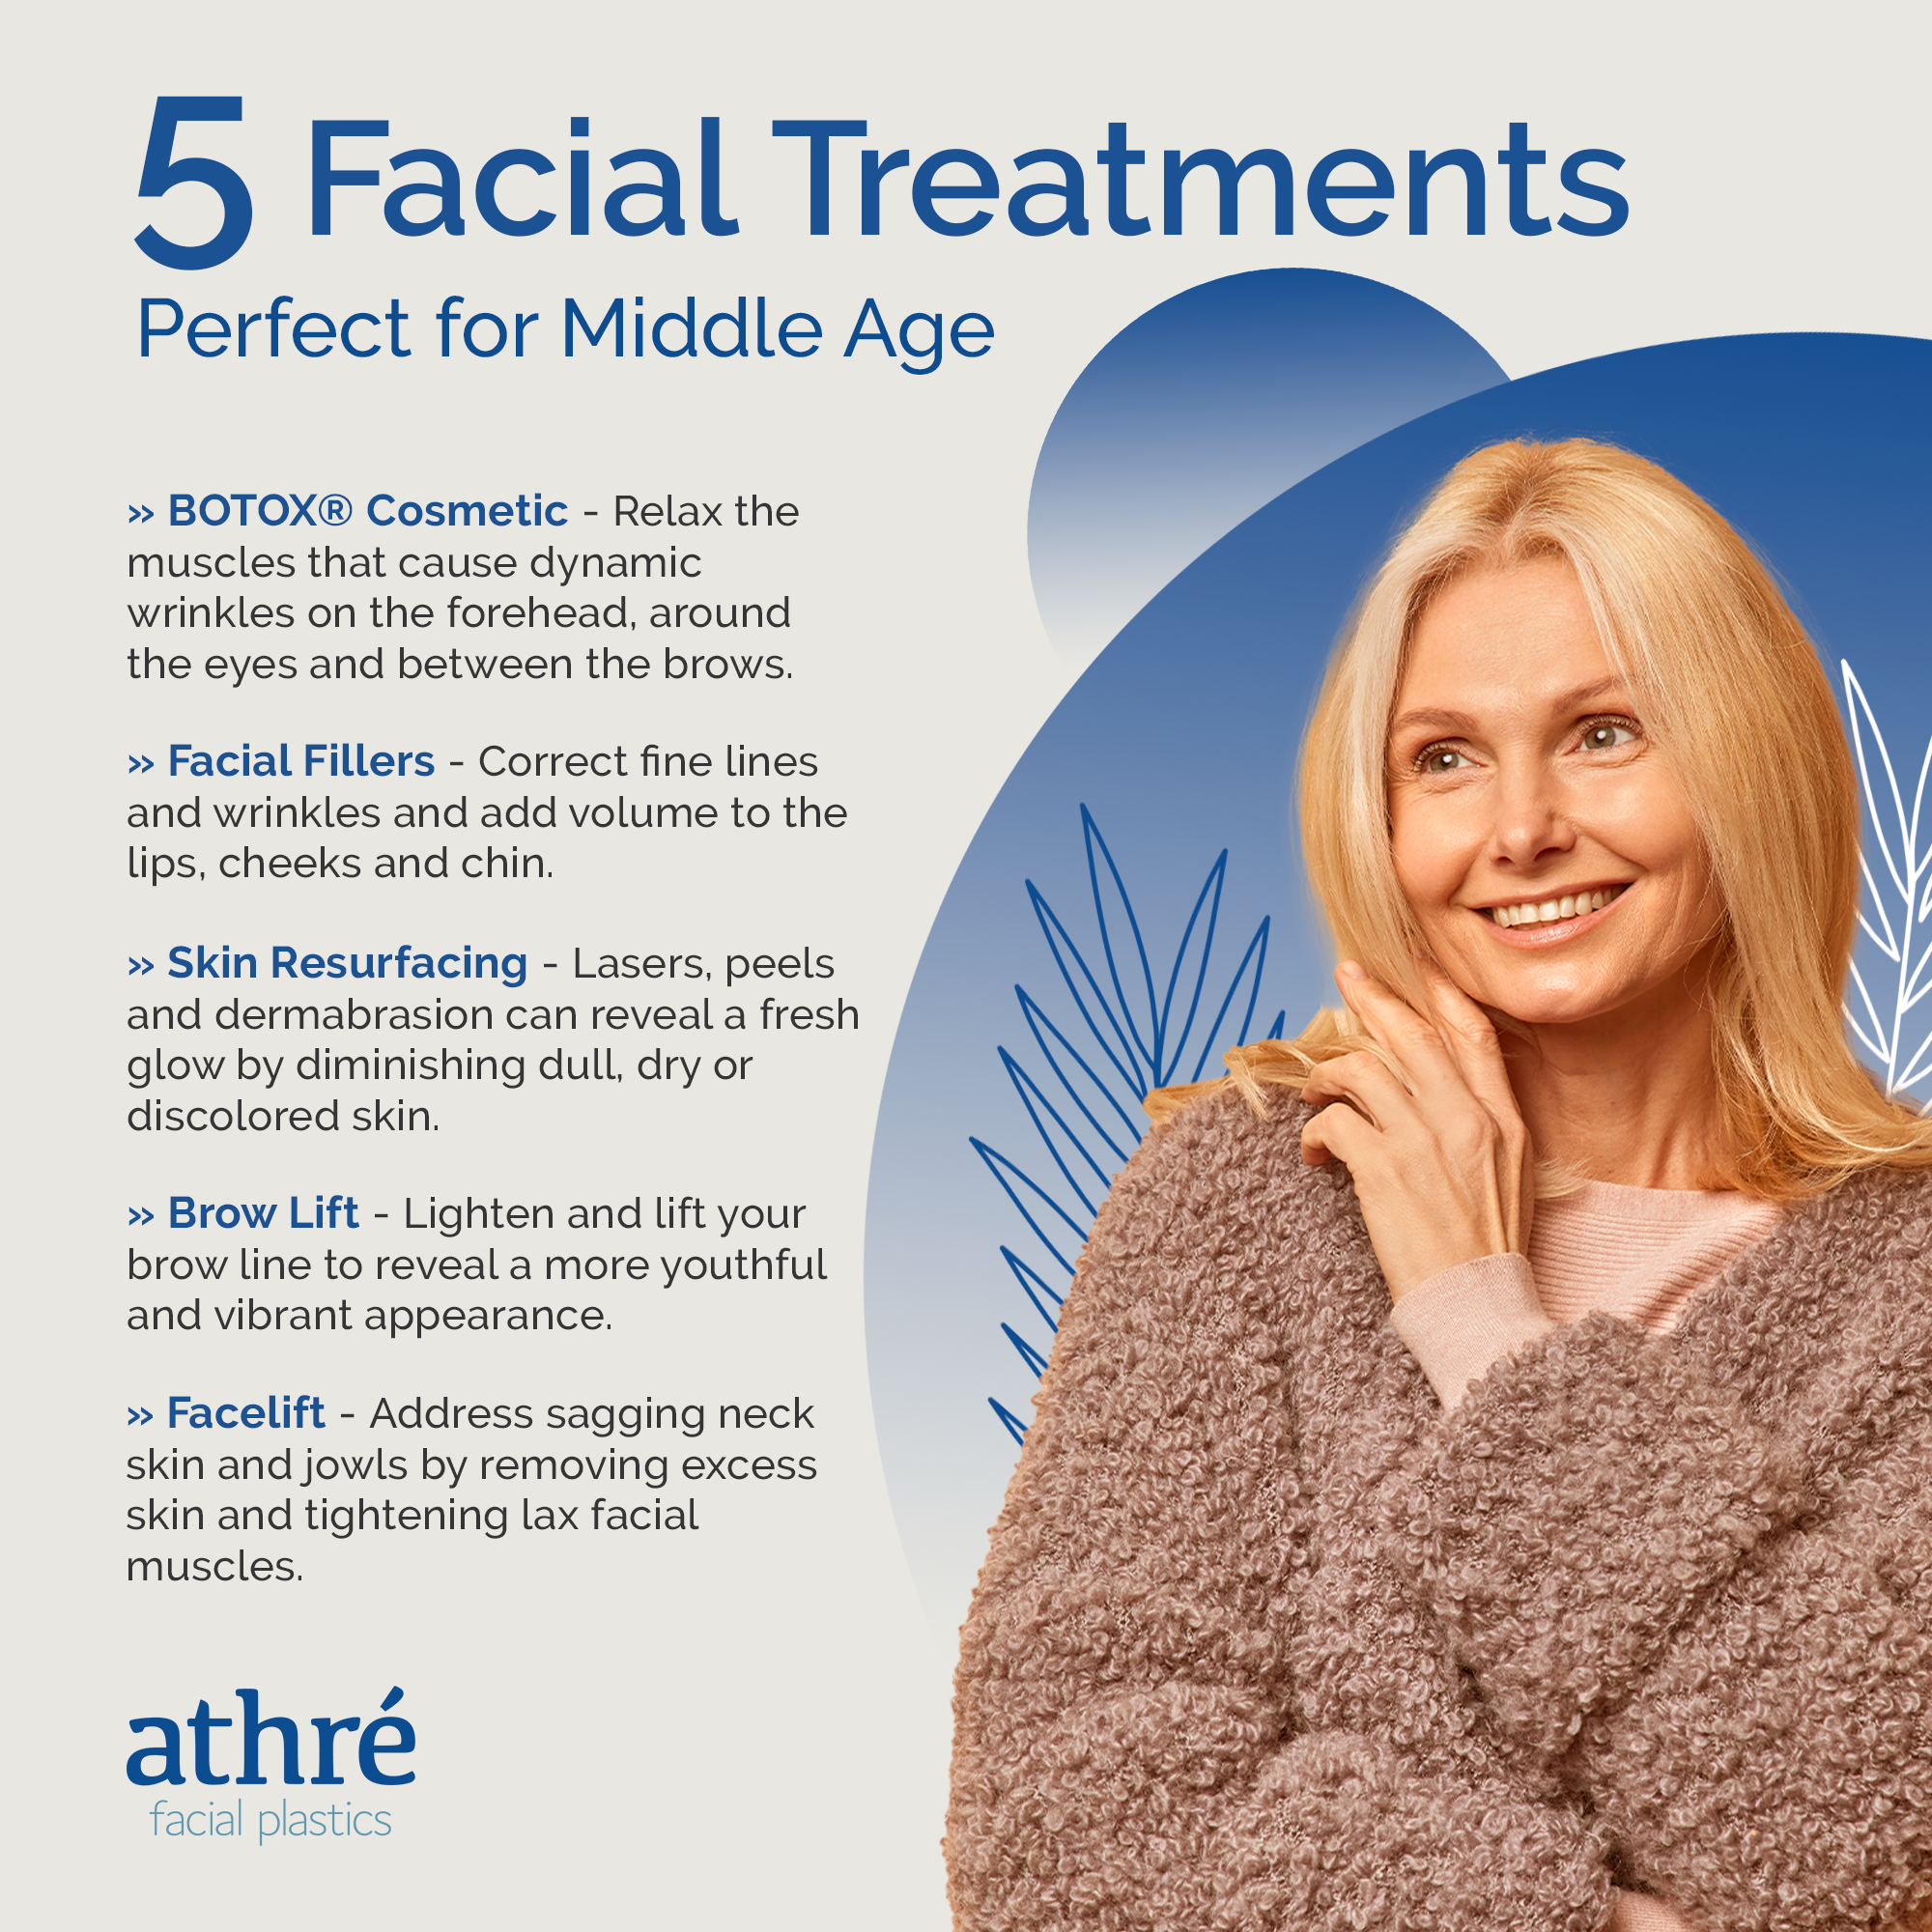 5 Facial Treatments Perfect for Middle Age